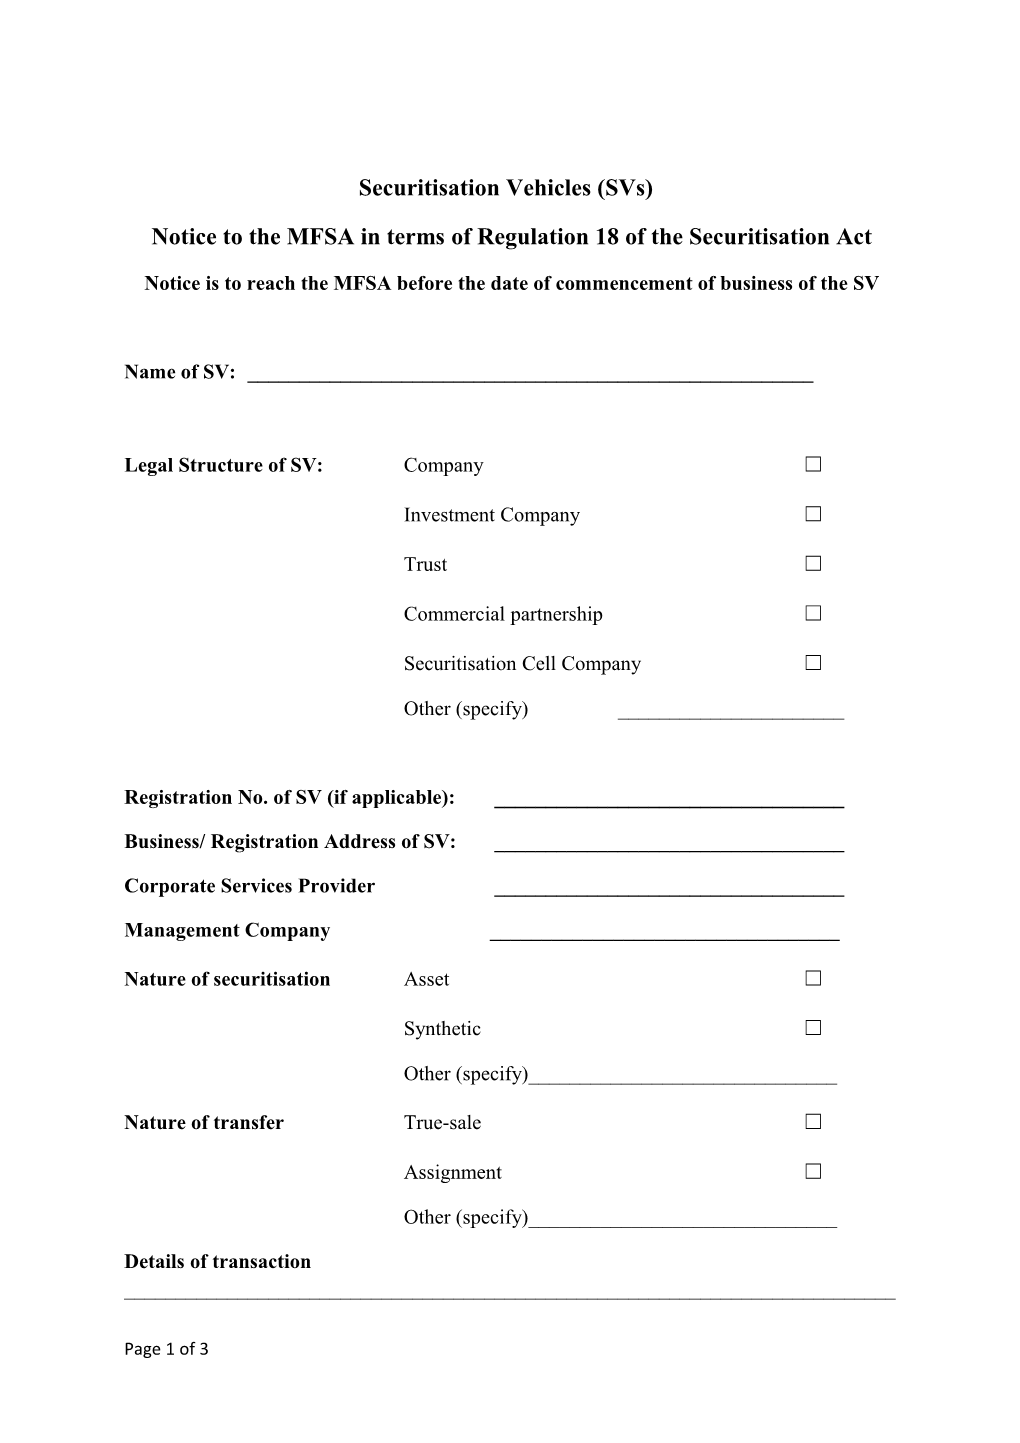 Notice to the MFSA in Terms of Regulation 18 of the Securitisation Act